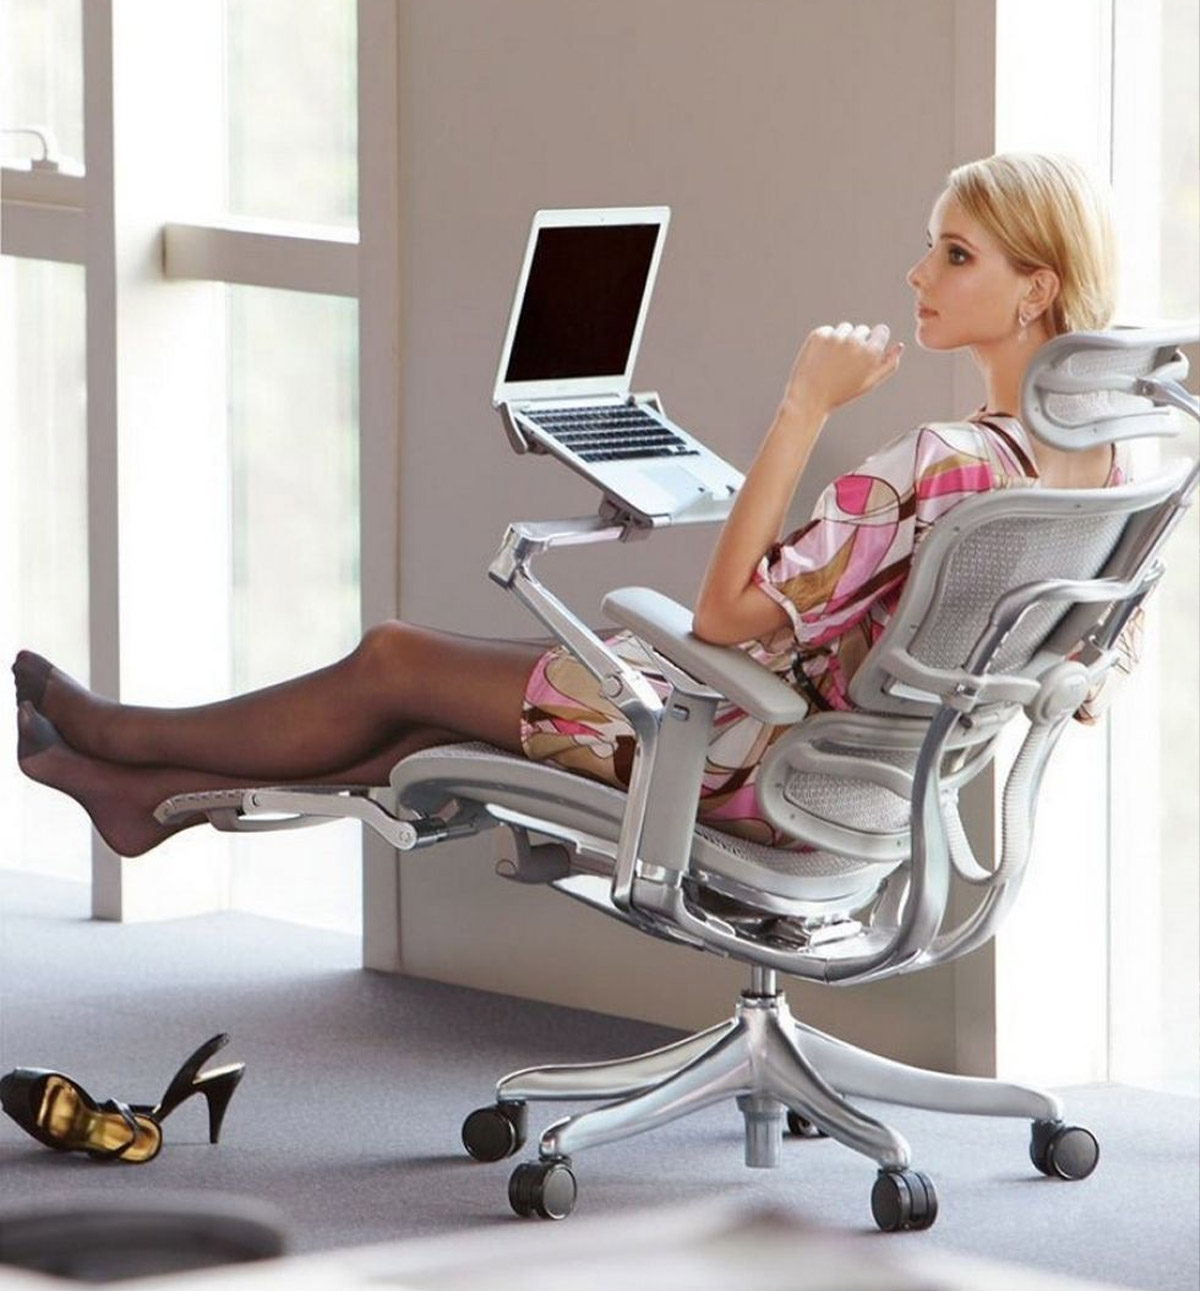 This Ultimate Office Chair Has a Laptop Mount, Leg Rests, and a Head Rest